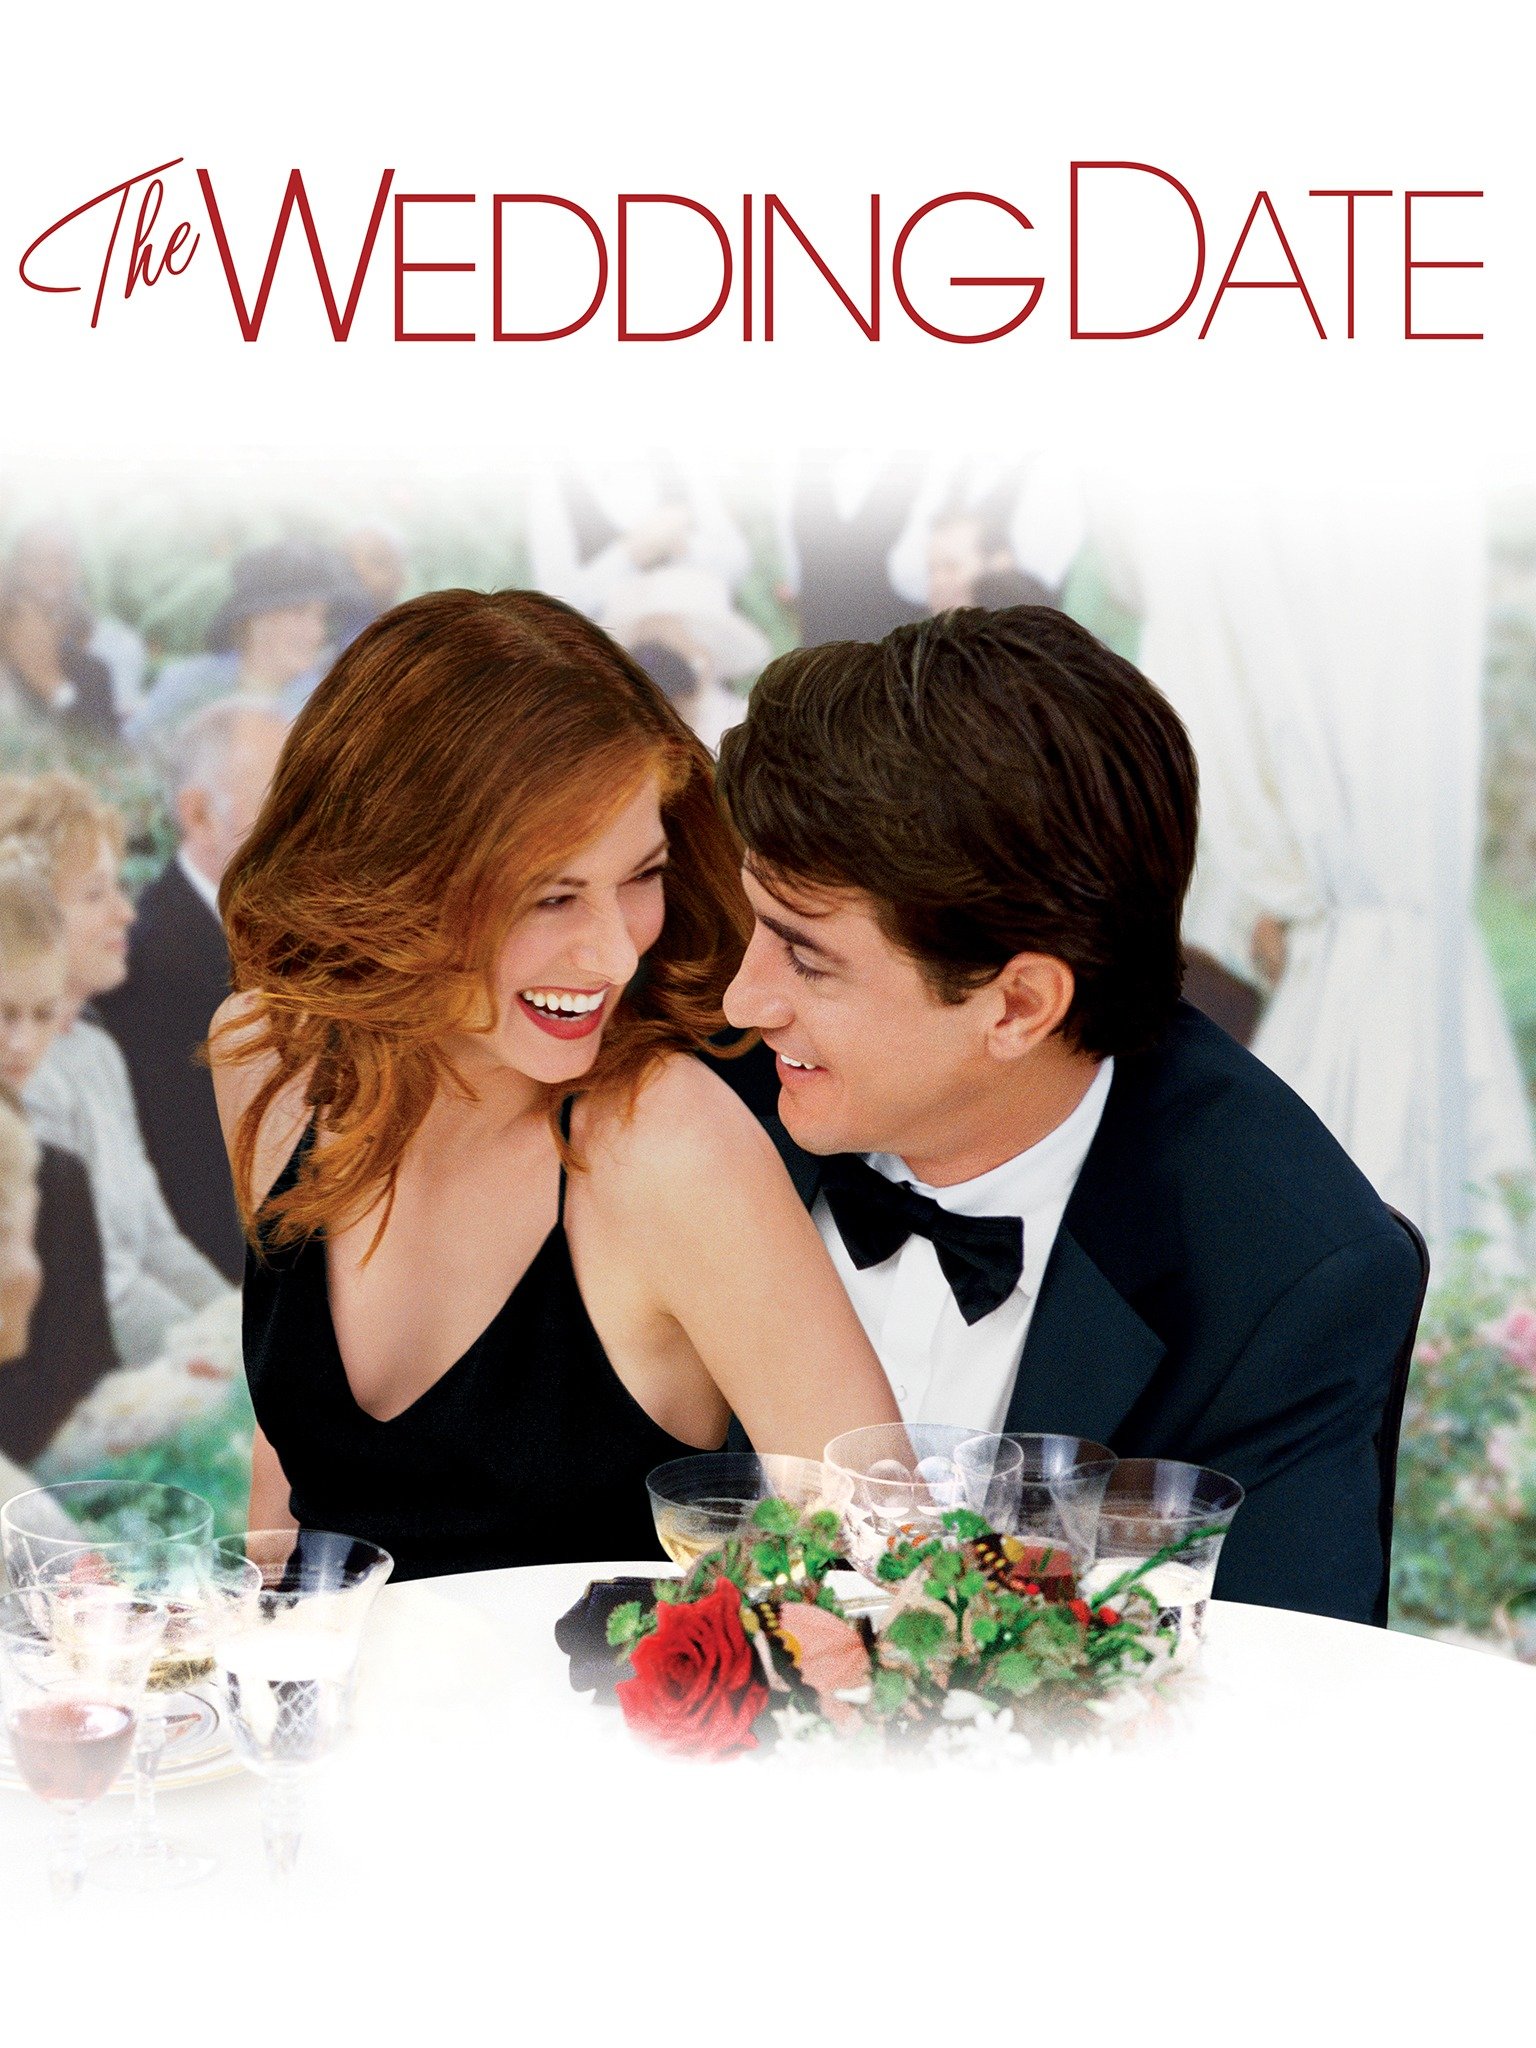 The Wedding Date - Iconic 2000's